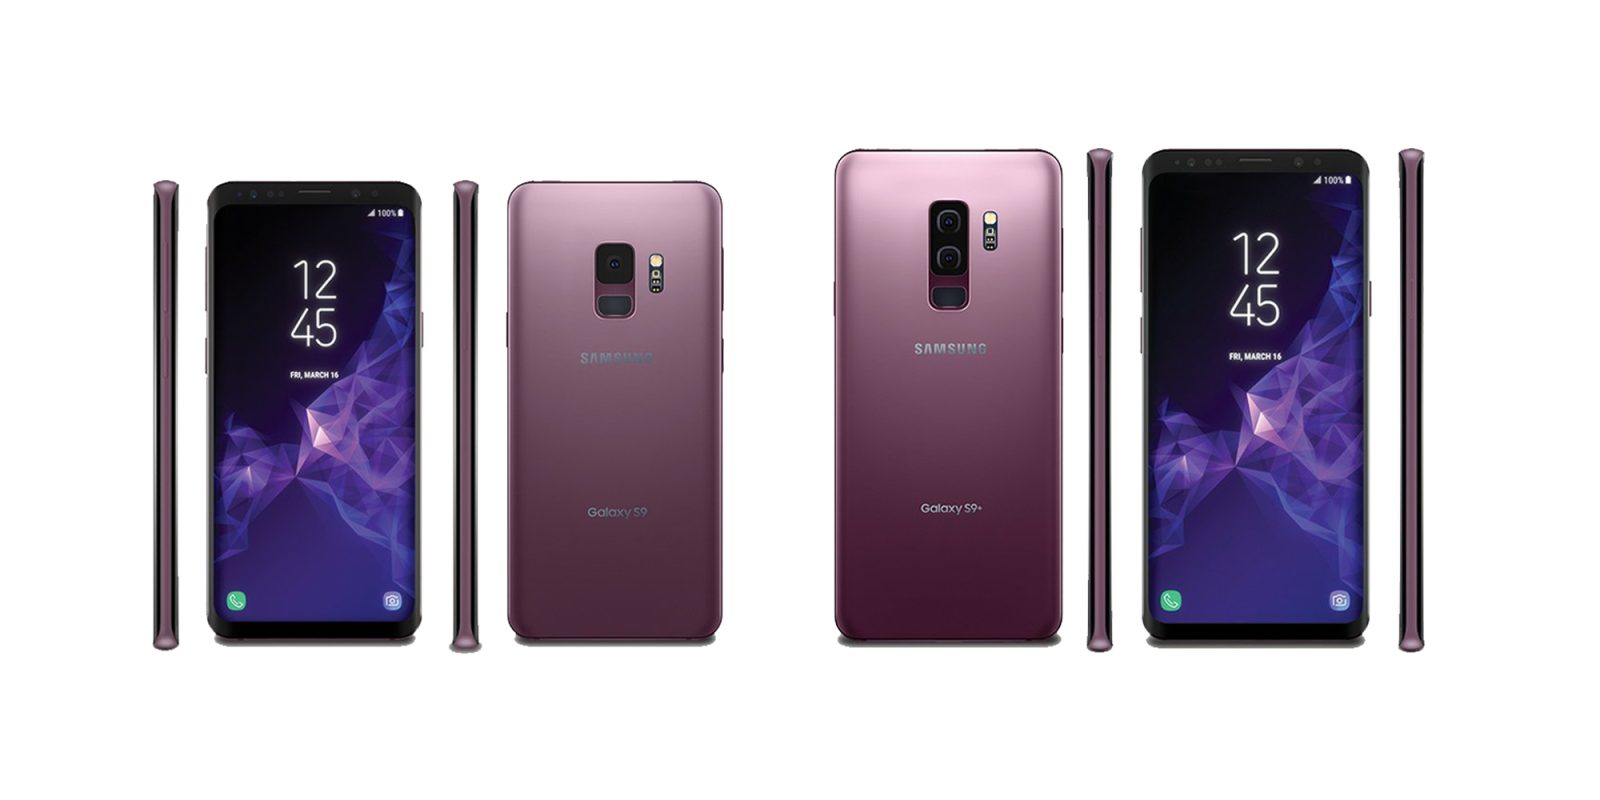 Galaxy S9 and S9 Plus Android Pie XXU2CRLI